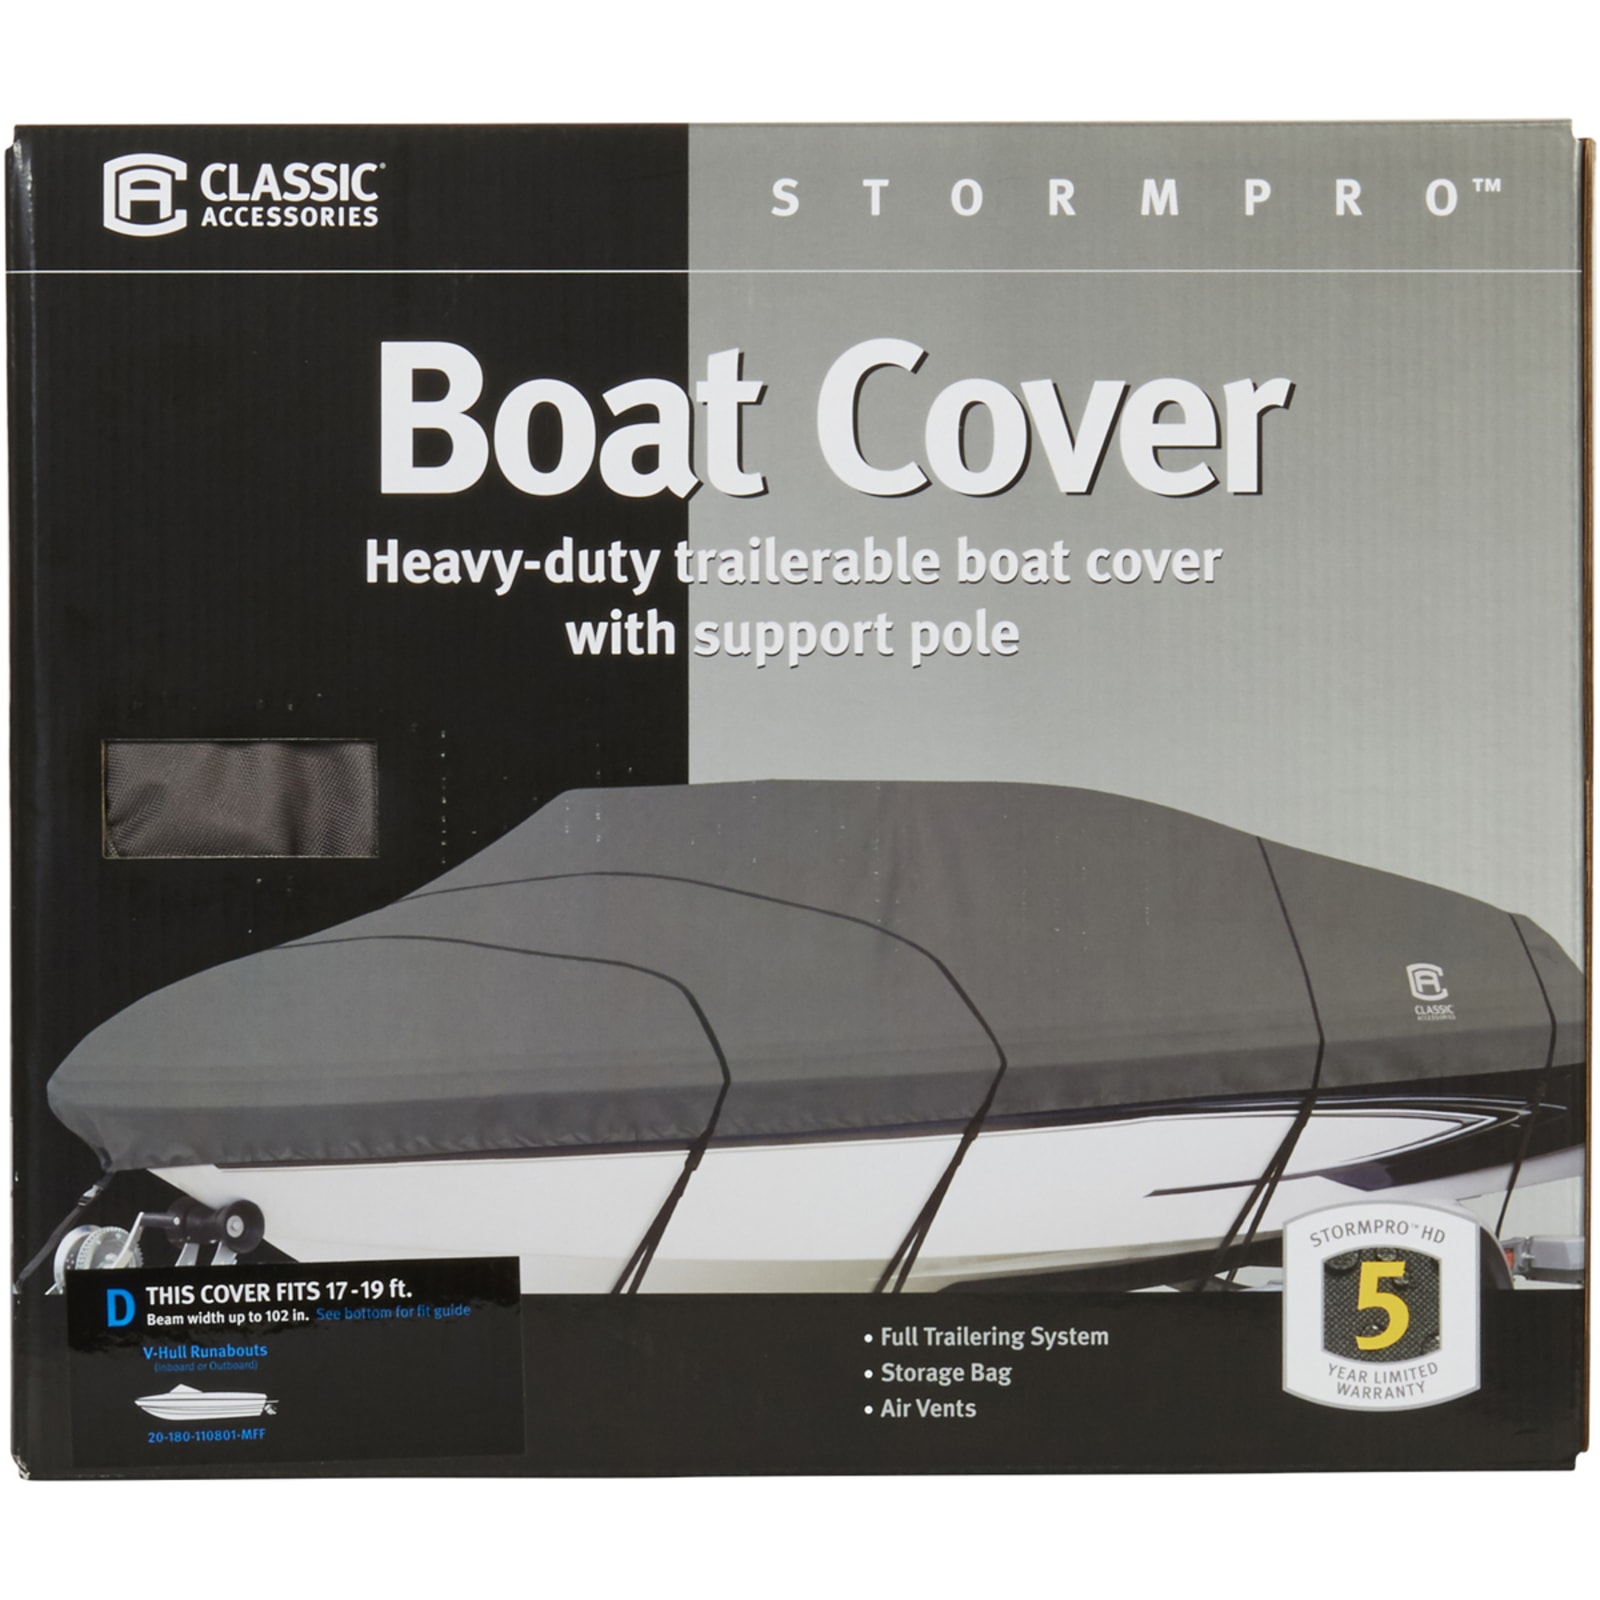 StormPro Boat Cover Model C by Classic Accessories at Fleet Farm